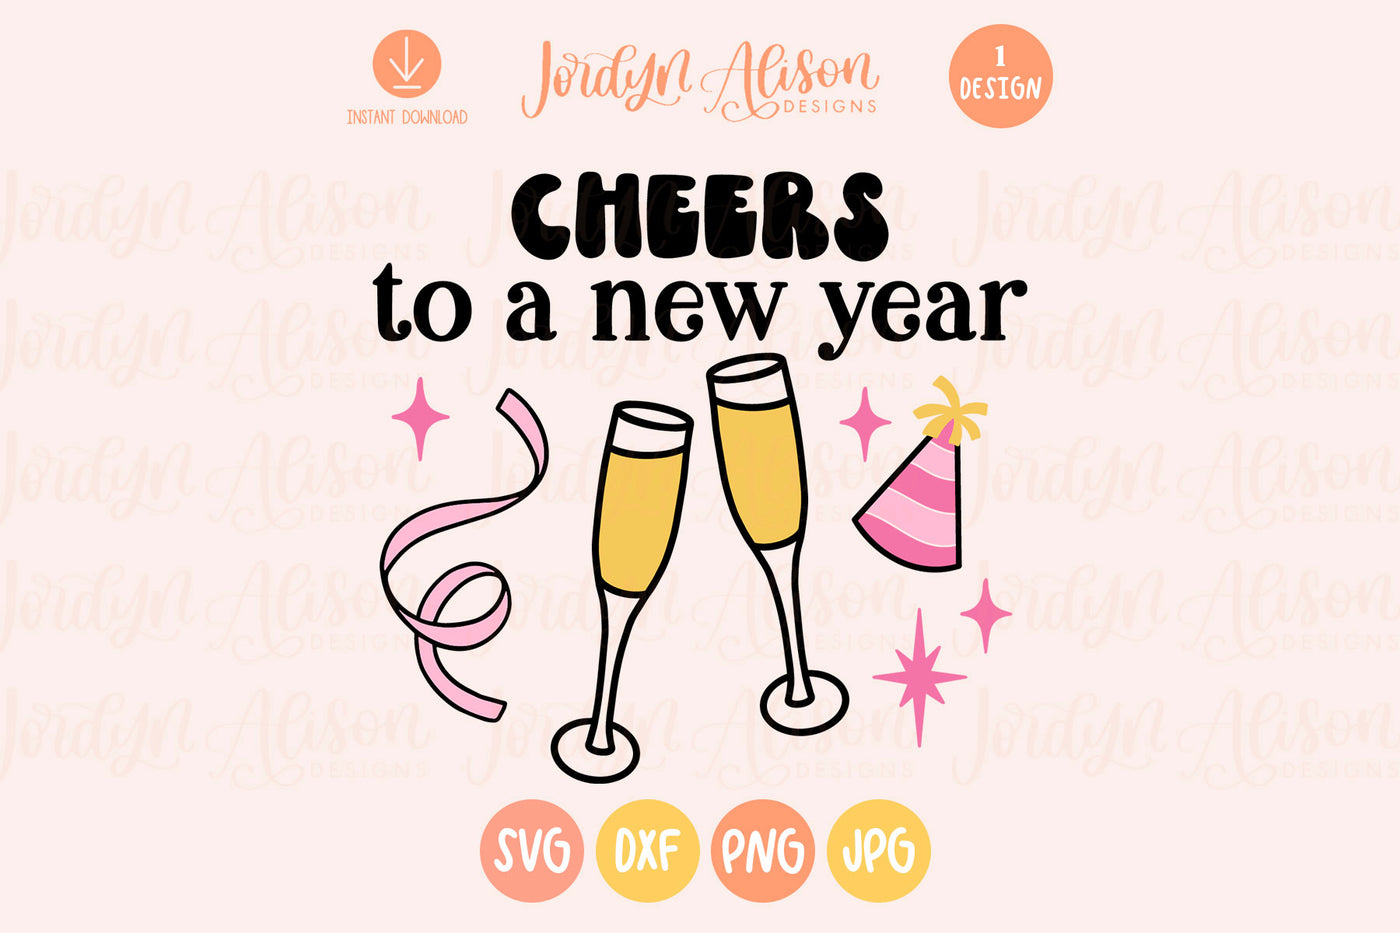 Cheers to a New Year SVG